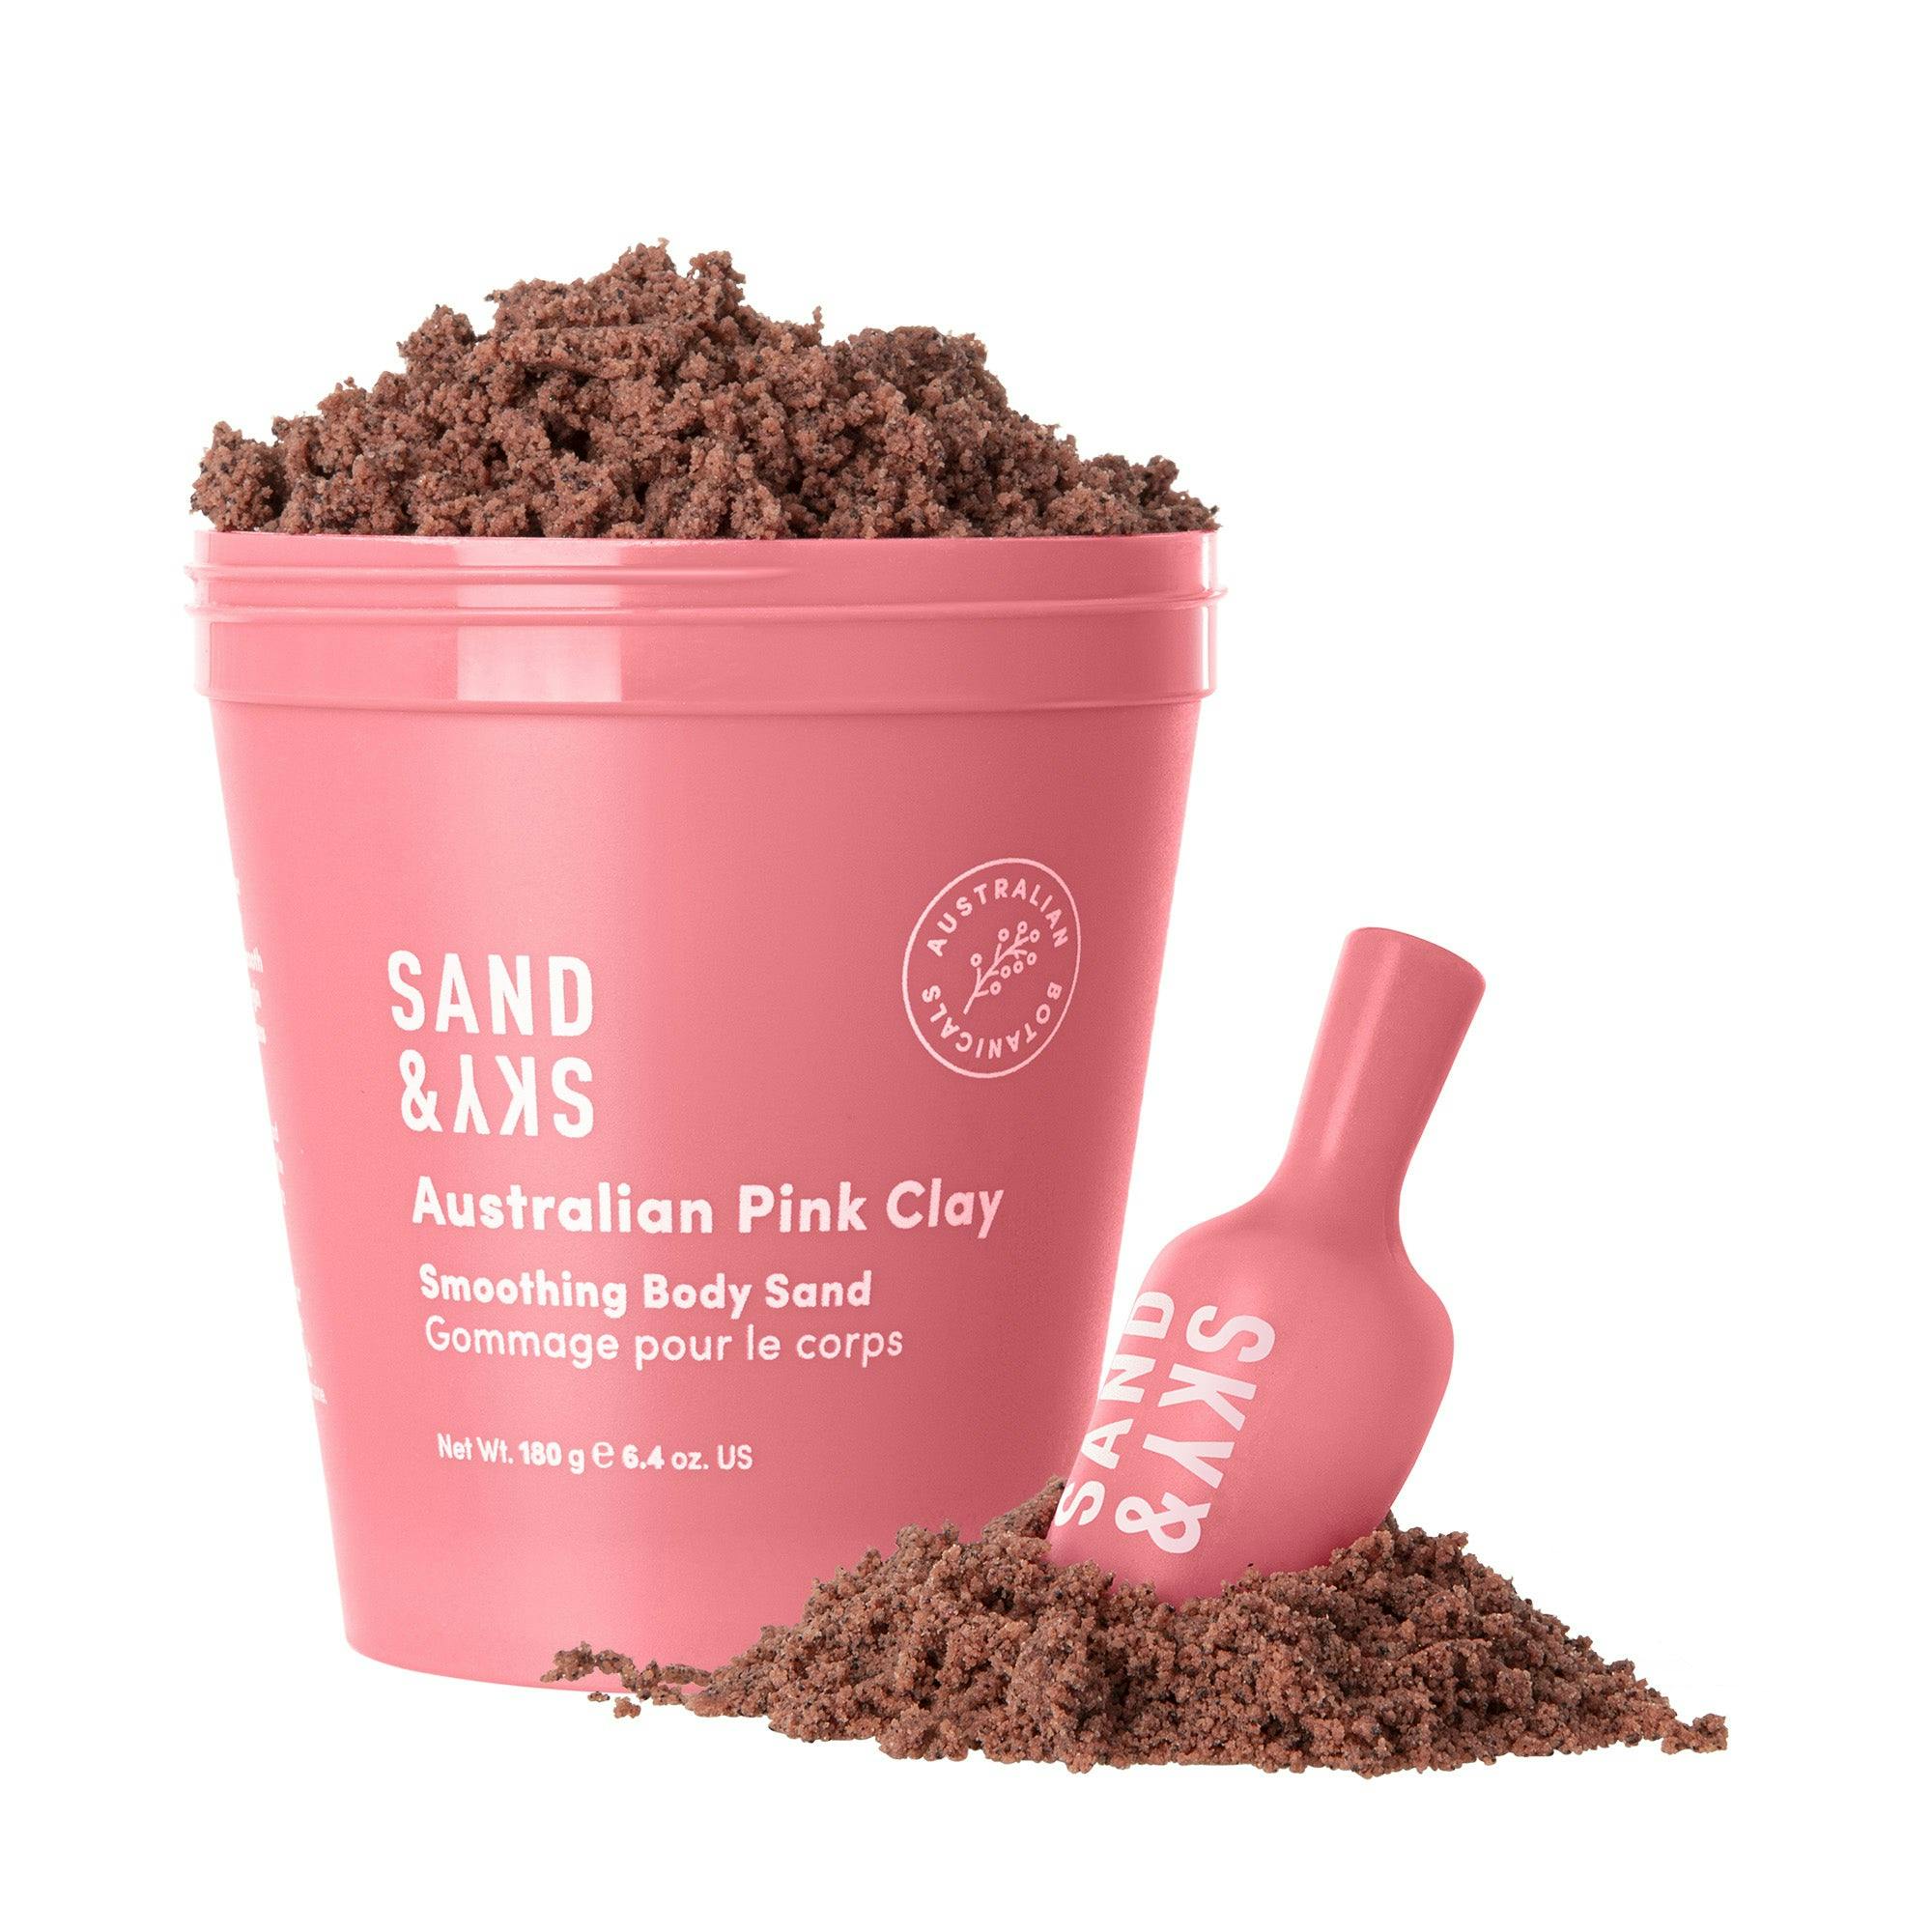 Sand & Sky Australian Pink Clay Smoothing Body Sand 180g